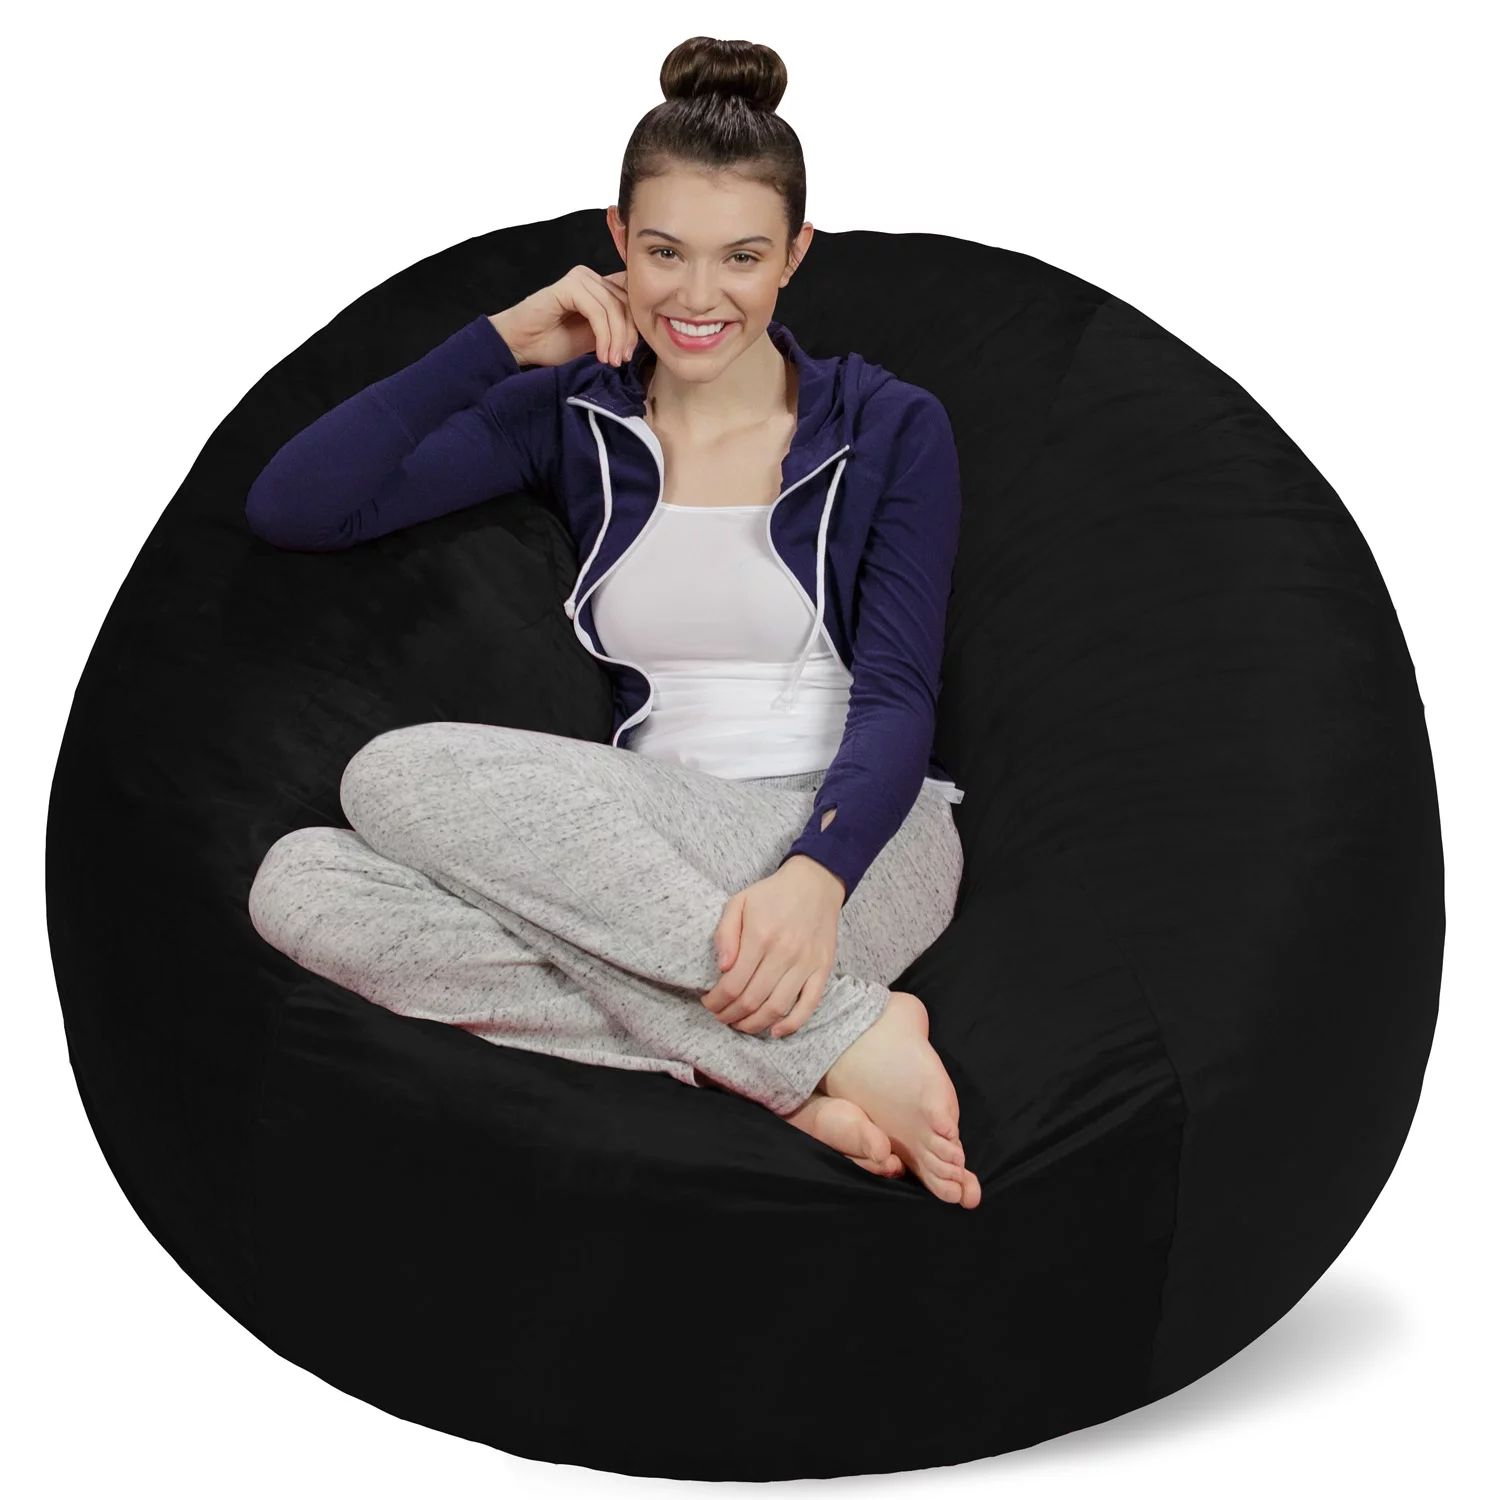 Sofa Sack Bean Bag Chair, Memory Foam Lounger with Microsuede Cover, All Ages, 5 ft, Black | Walmart (US)